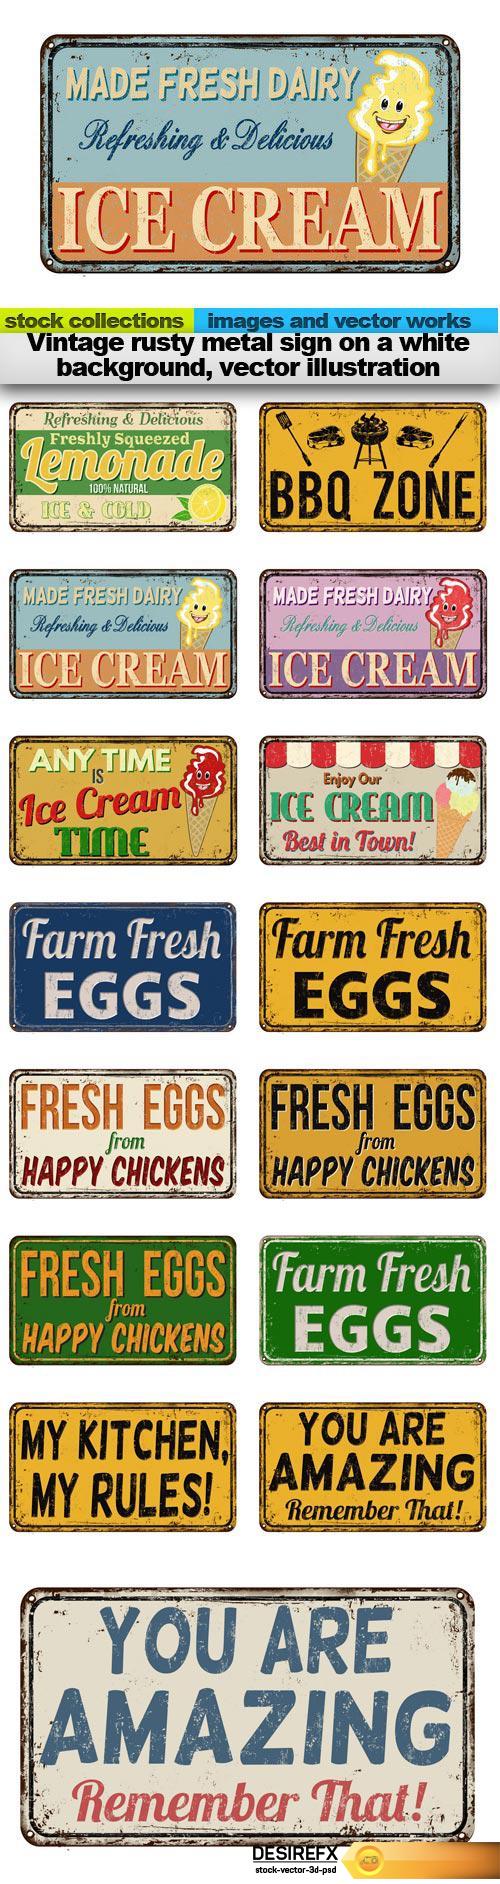 Vintage rusty metal sign on a white background, vector illustration, 15 x EPS